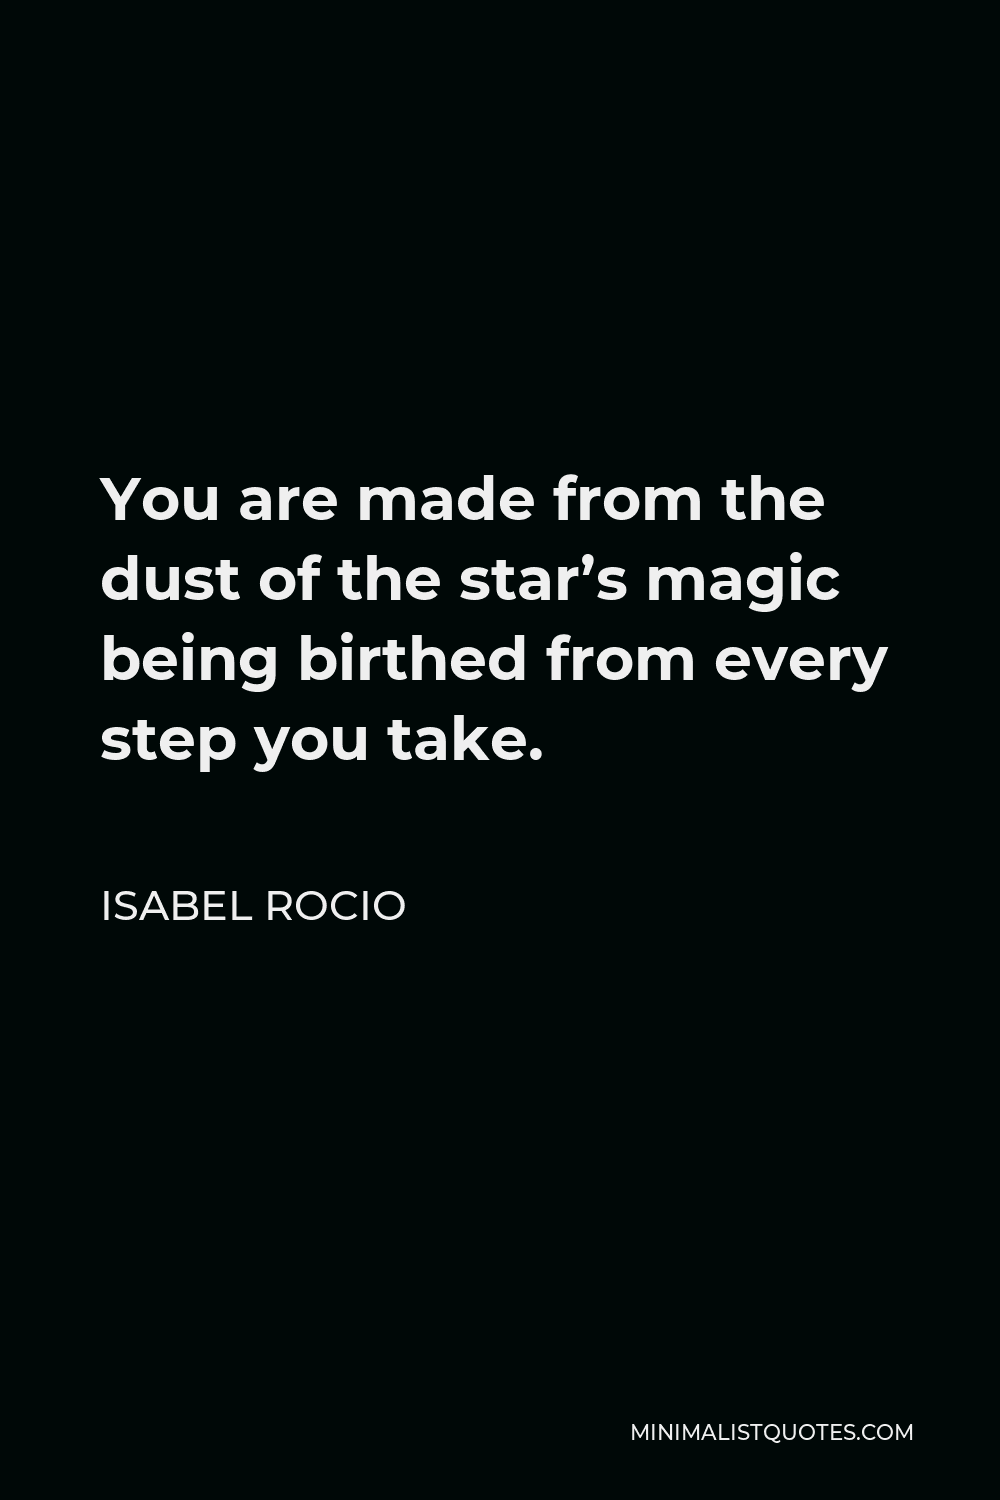 Isabel Rocio Quote - You are made from the dust of the star’s magic being birthed from every step you take.